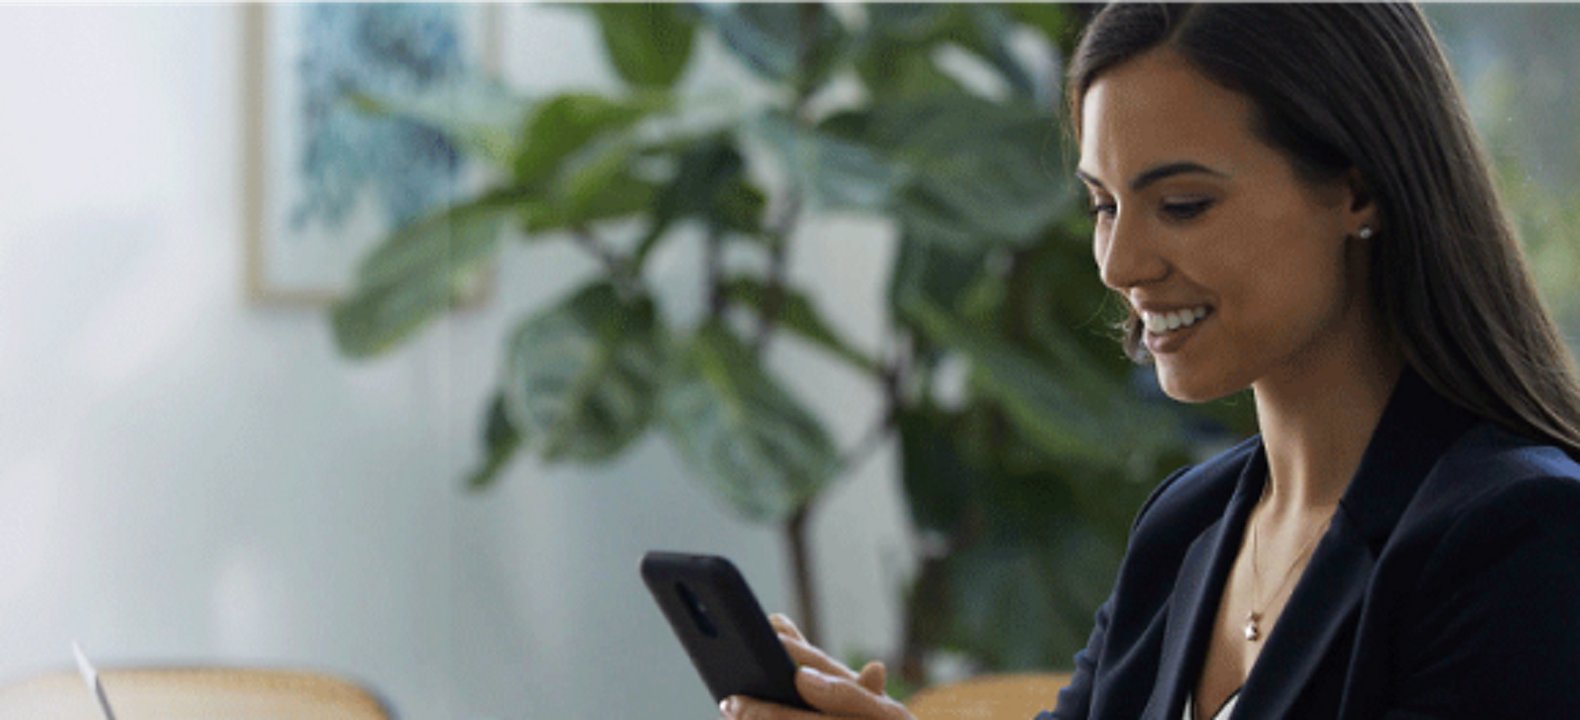 A smiling financial services professional uses her smartphone while seated in a conference room